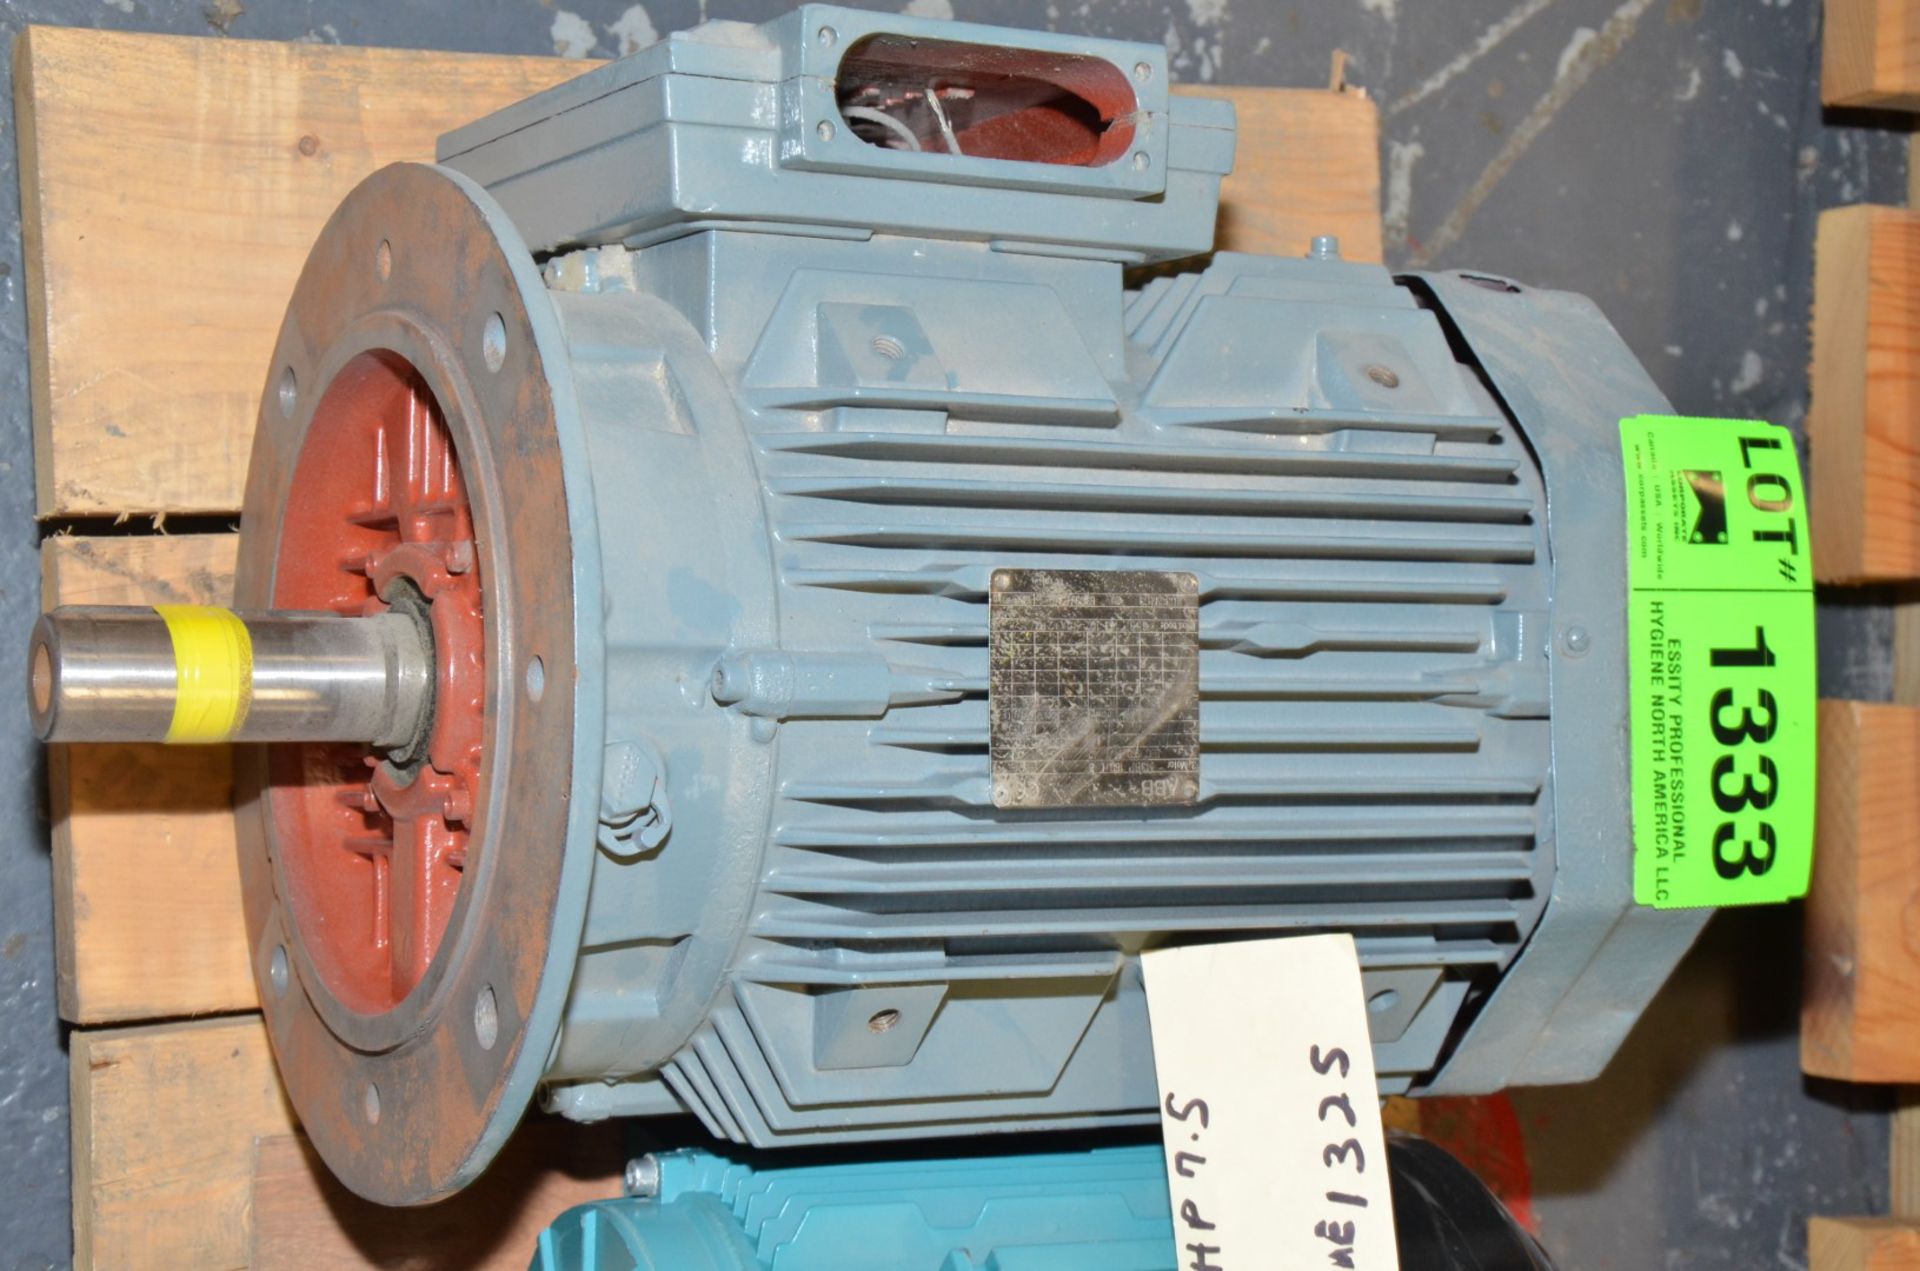 ABB 11 KW 1174 RPM 460V ELECTRIC MOTOR [RIGGING FEE FOR LOT #1333 - $25 USD PLUS APPLICABLE TAXES]